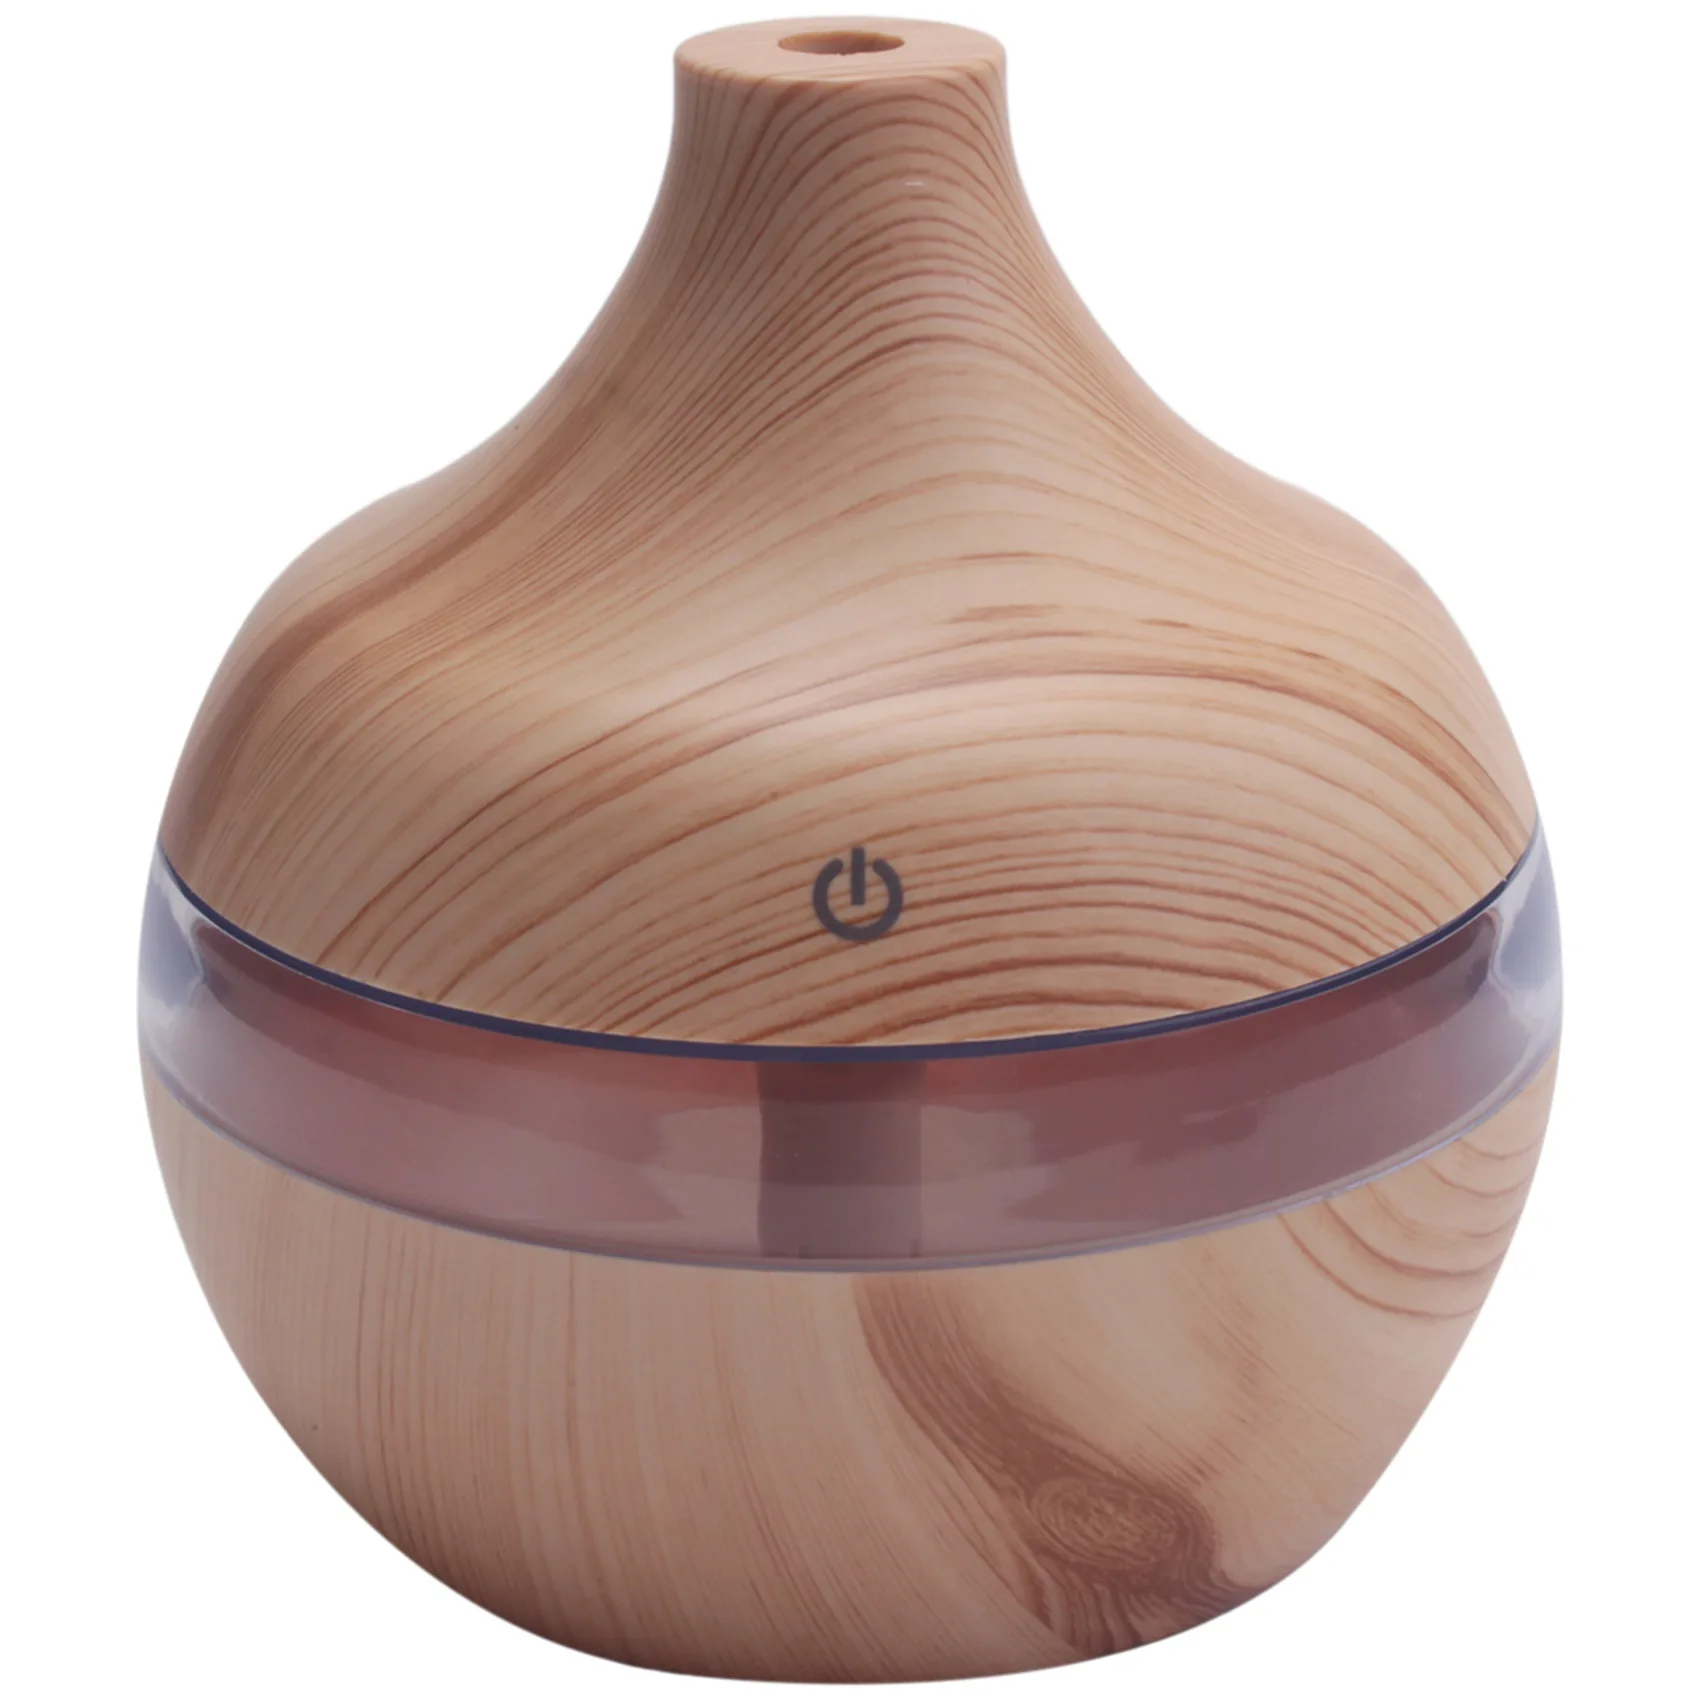 

Wood Grain Aromatherapy USB Humidifier Water Droplets Air Purification essential oil aroma diffuser Creative home grain